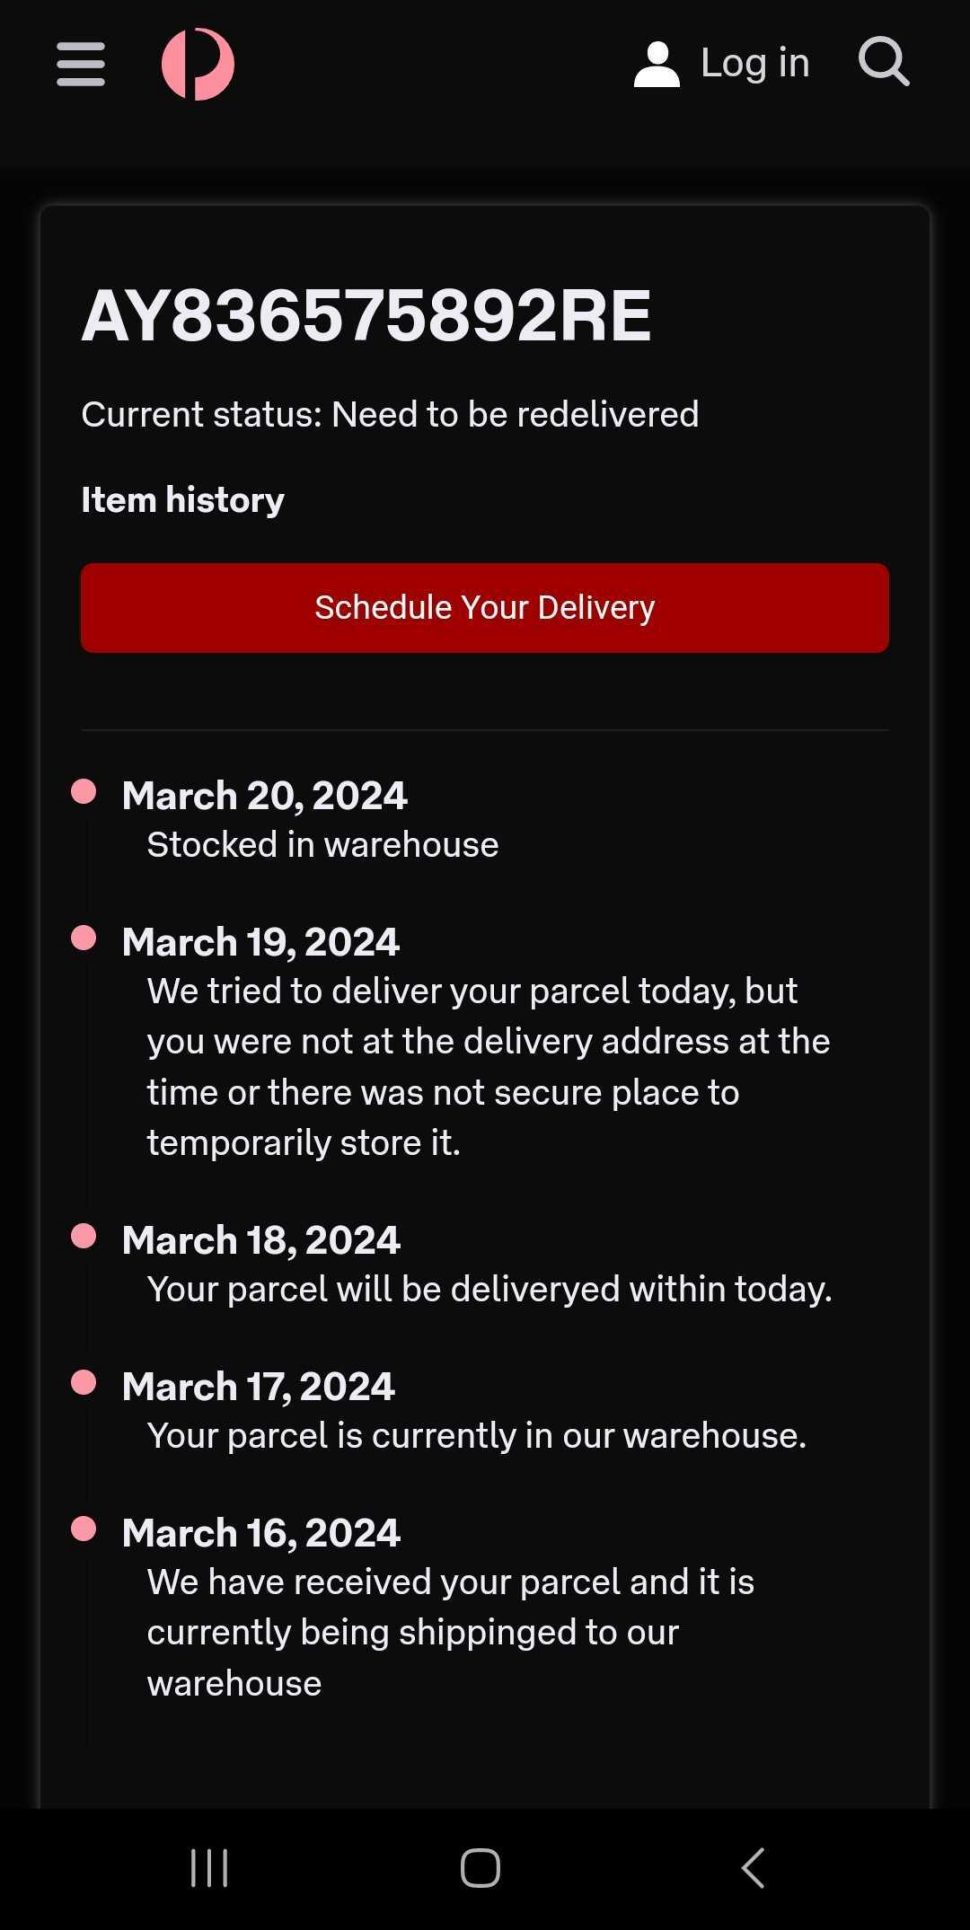 Mobile app screenshot displaying a package tracking status with a red and black color scheme. The tracking number ‘AY836575892RE’ is shown with the status ‘Need to be redelivered.’ A ‘Schedule Your Delivery’ button is present, and the delivery history indicates multiple attempts and current holding at the warehouse.